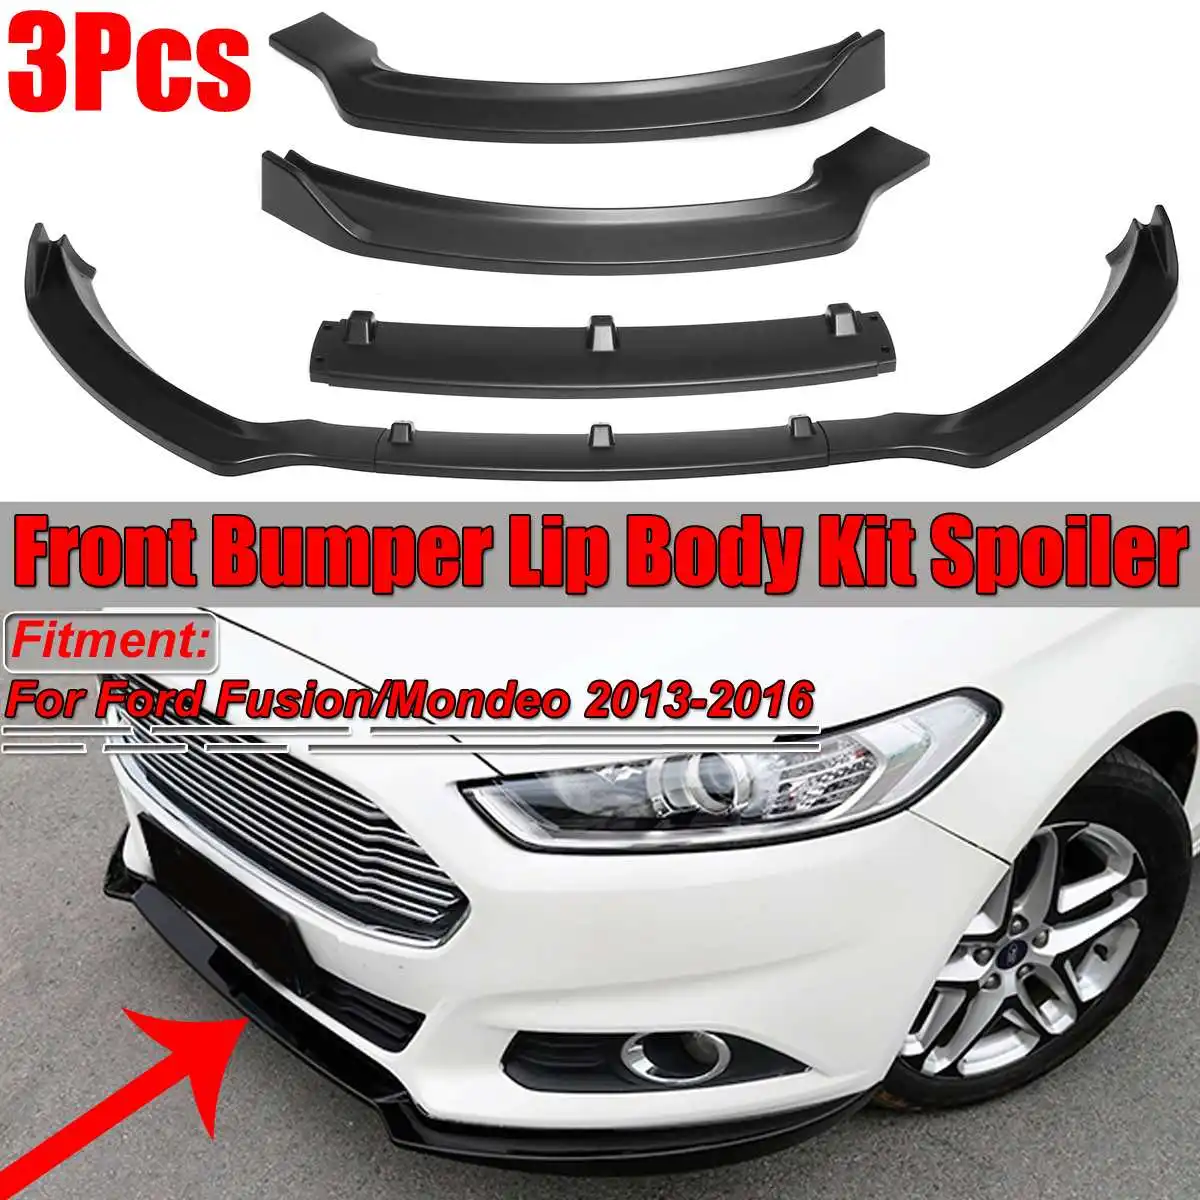 Stay Tuned Performance PU/696/PWH Paintd White Front Bumper Body Kit Lip 3PCS Compaitble with 2017-2018 Fusion/Mondeo 